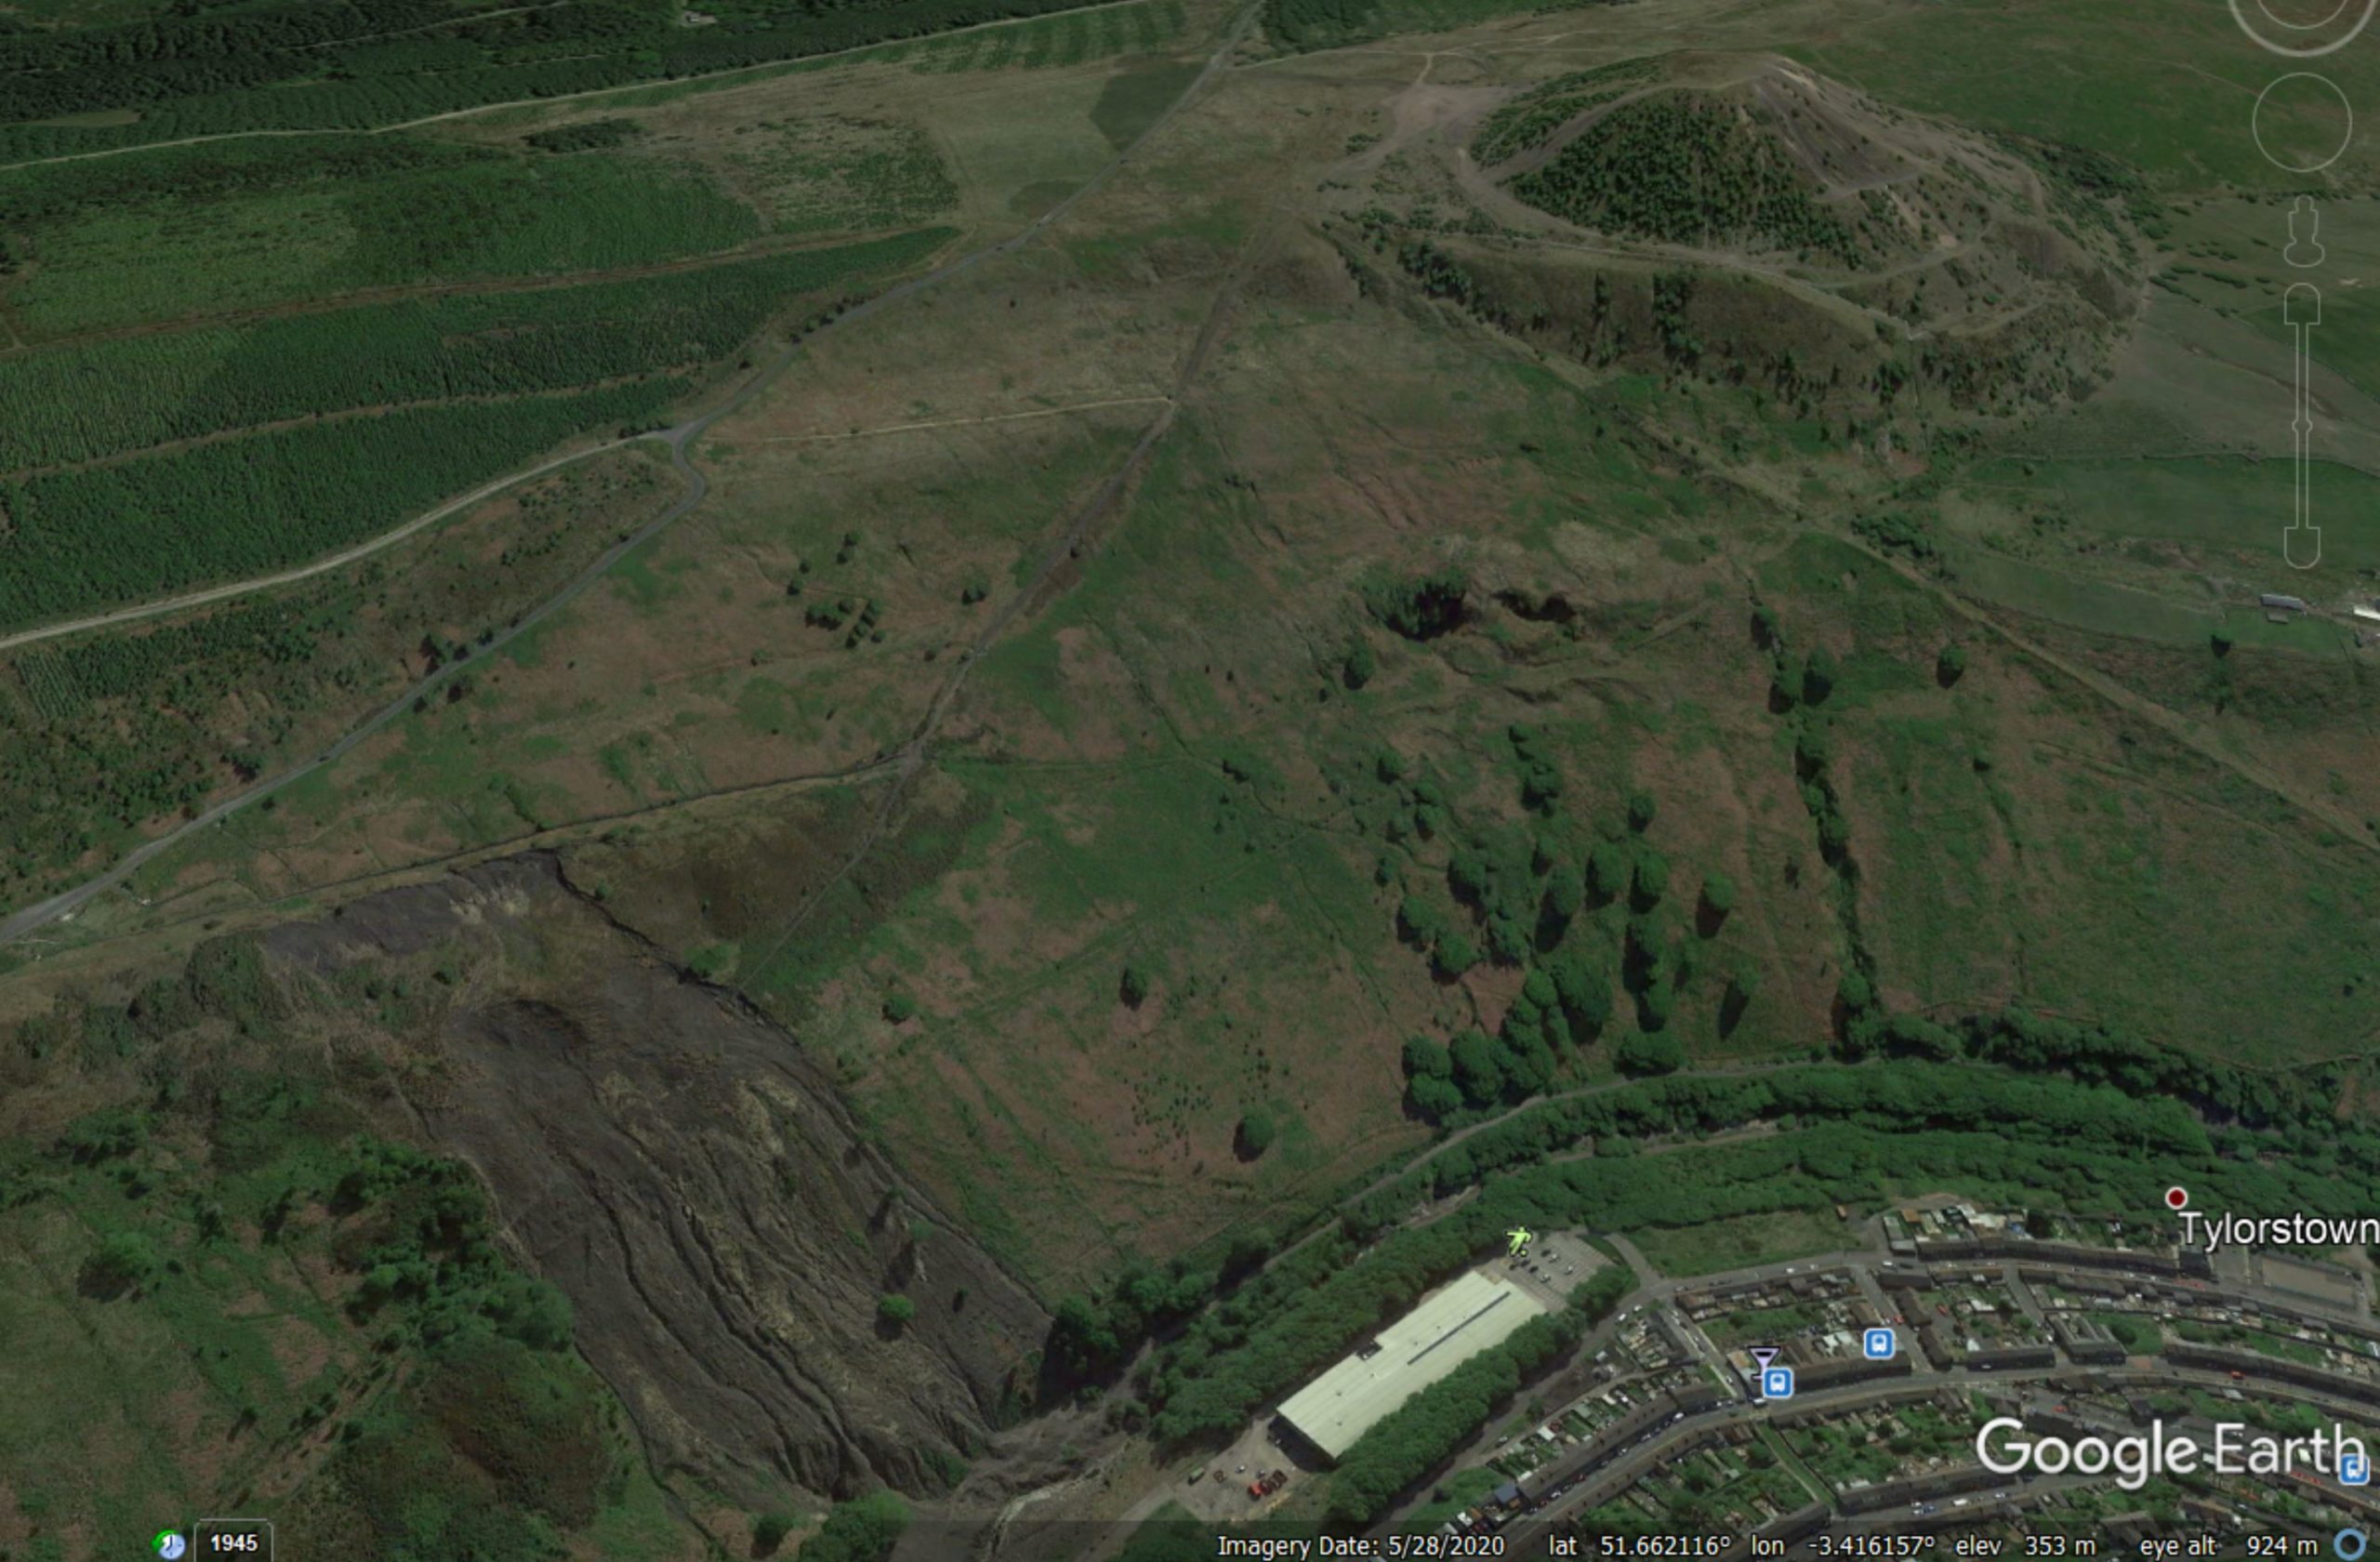 Google Earth image of the coal waste tips at Tylorstown in South Wales. 